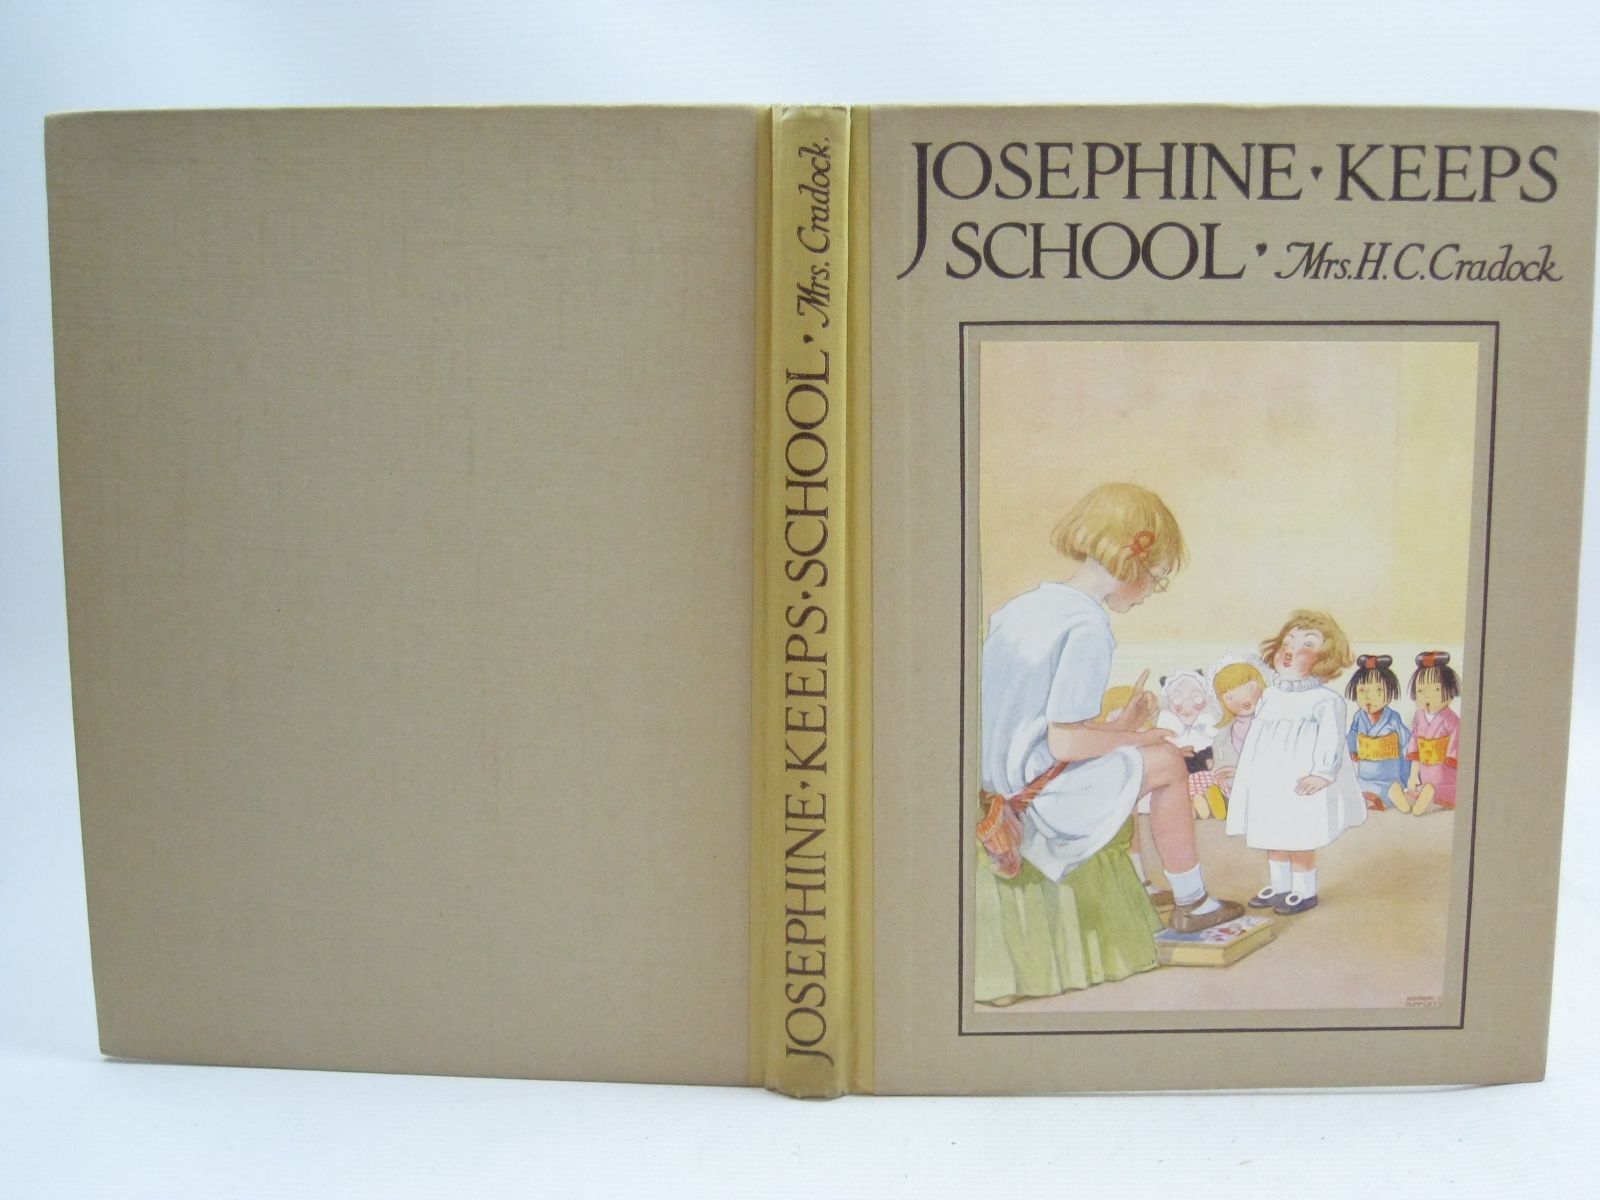 Photo of JOSEPHINE KEEPS SCHOOL written by Cradock, Mrs. H.C. illustrated by Appleton, Honor C. published by Blackie & Son Ltd. (STOCK CODE: 1405180)  for sale by Stella & Rose's Books